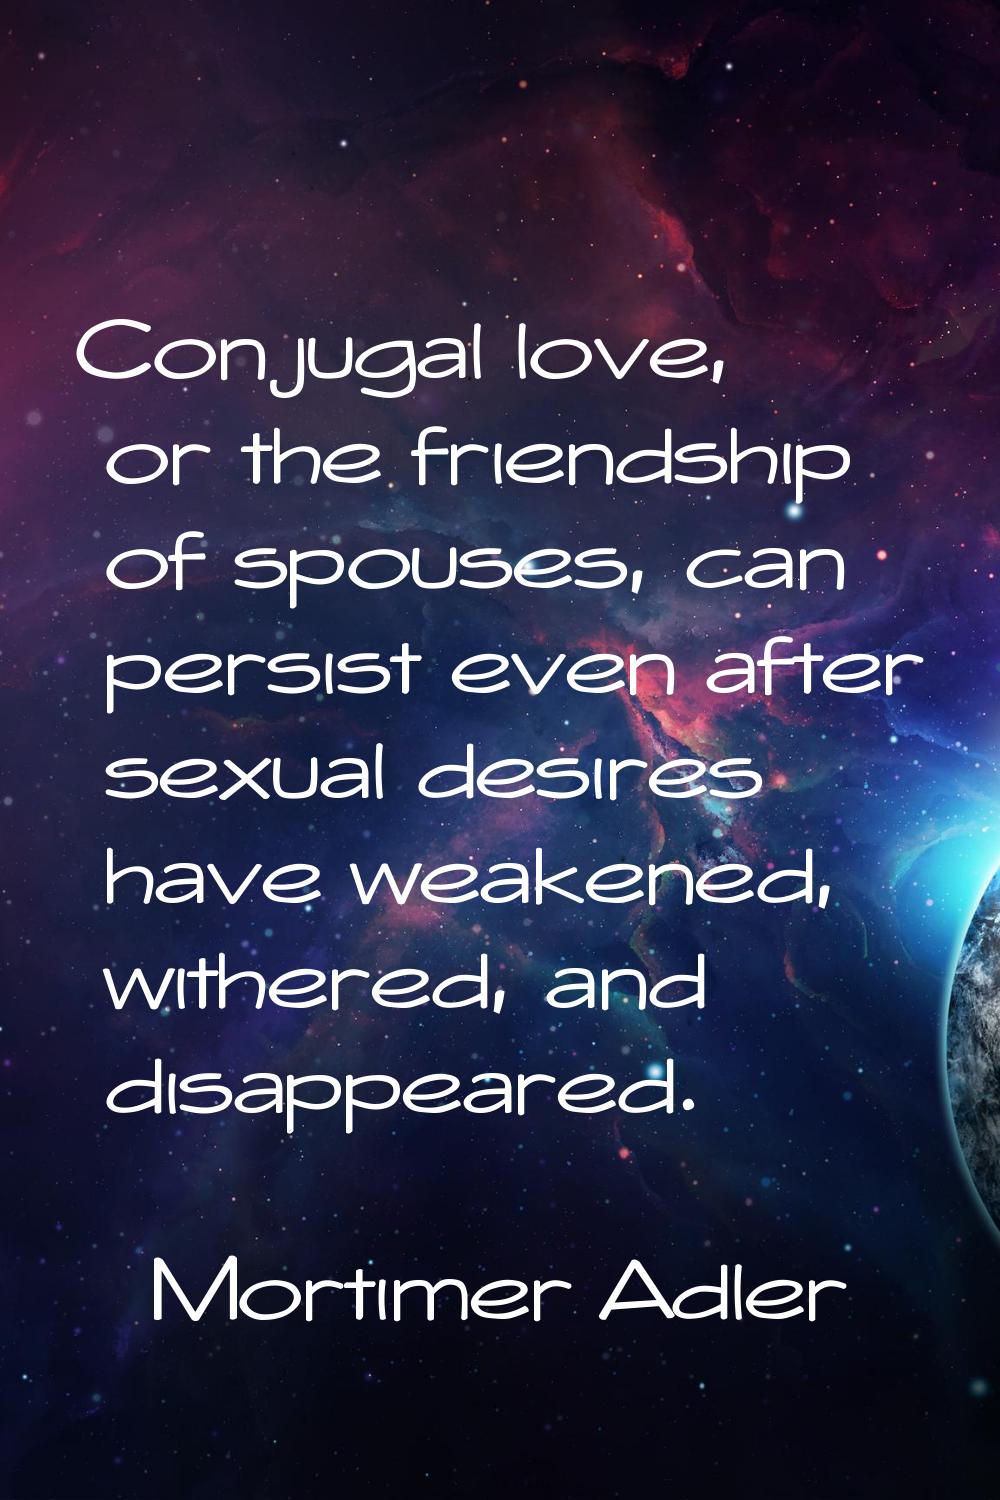 Conjugal love, or the friendship of spouses, can persist even after sexual desires have weakened, w